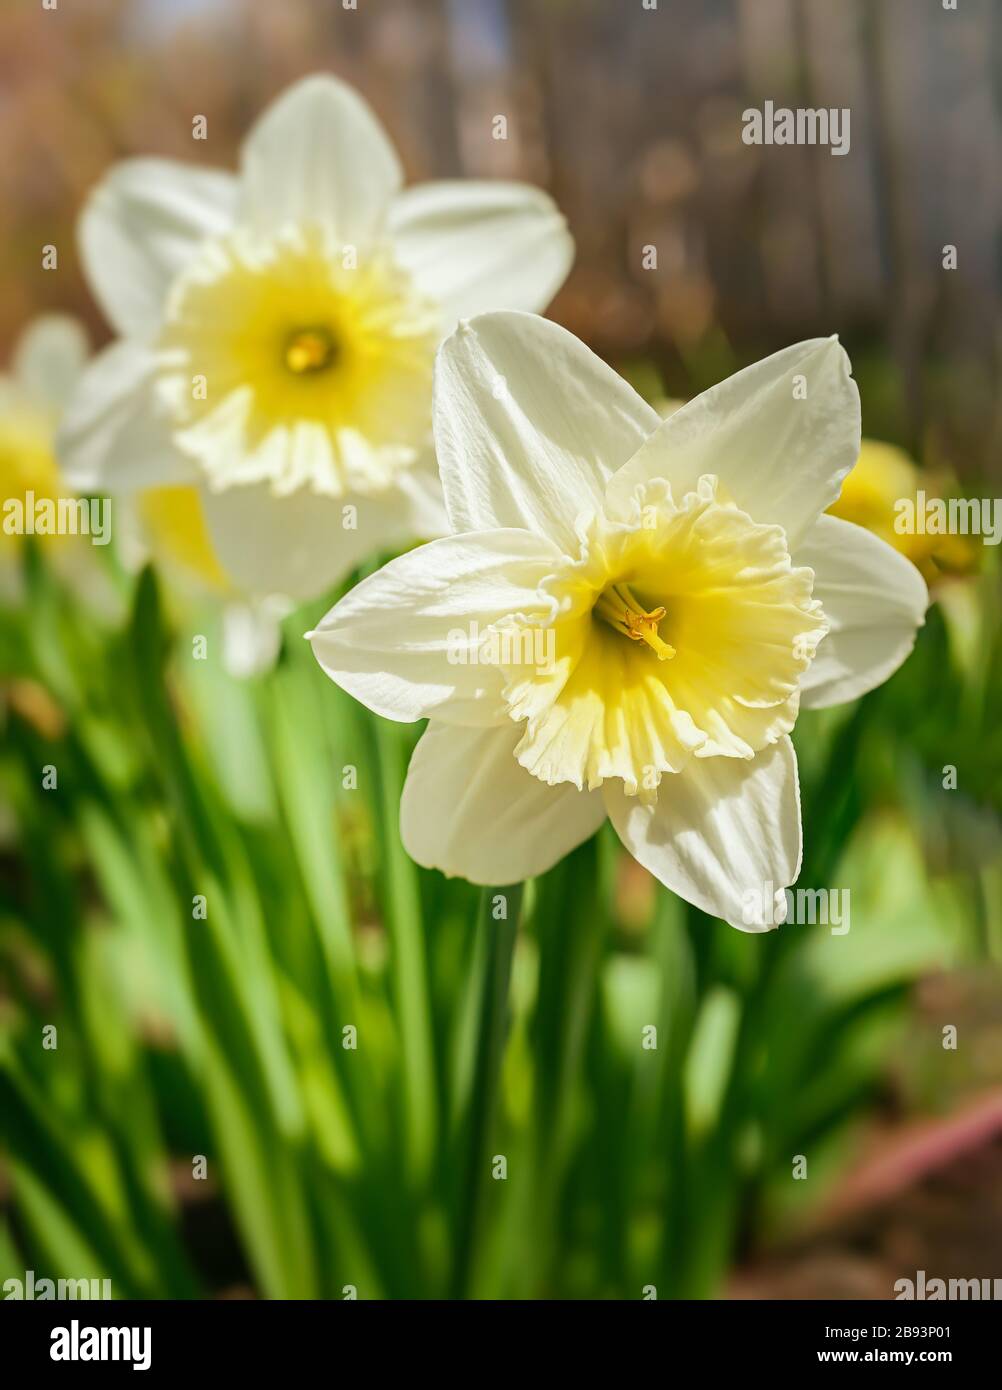 Ice Follies daffodils blooming in the home garden. Stock Photo